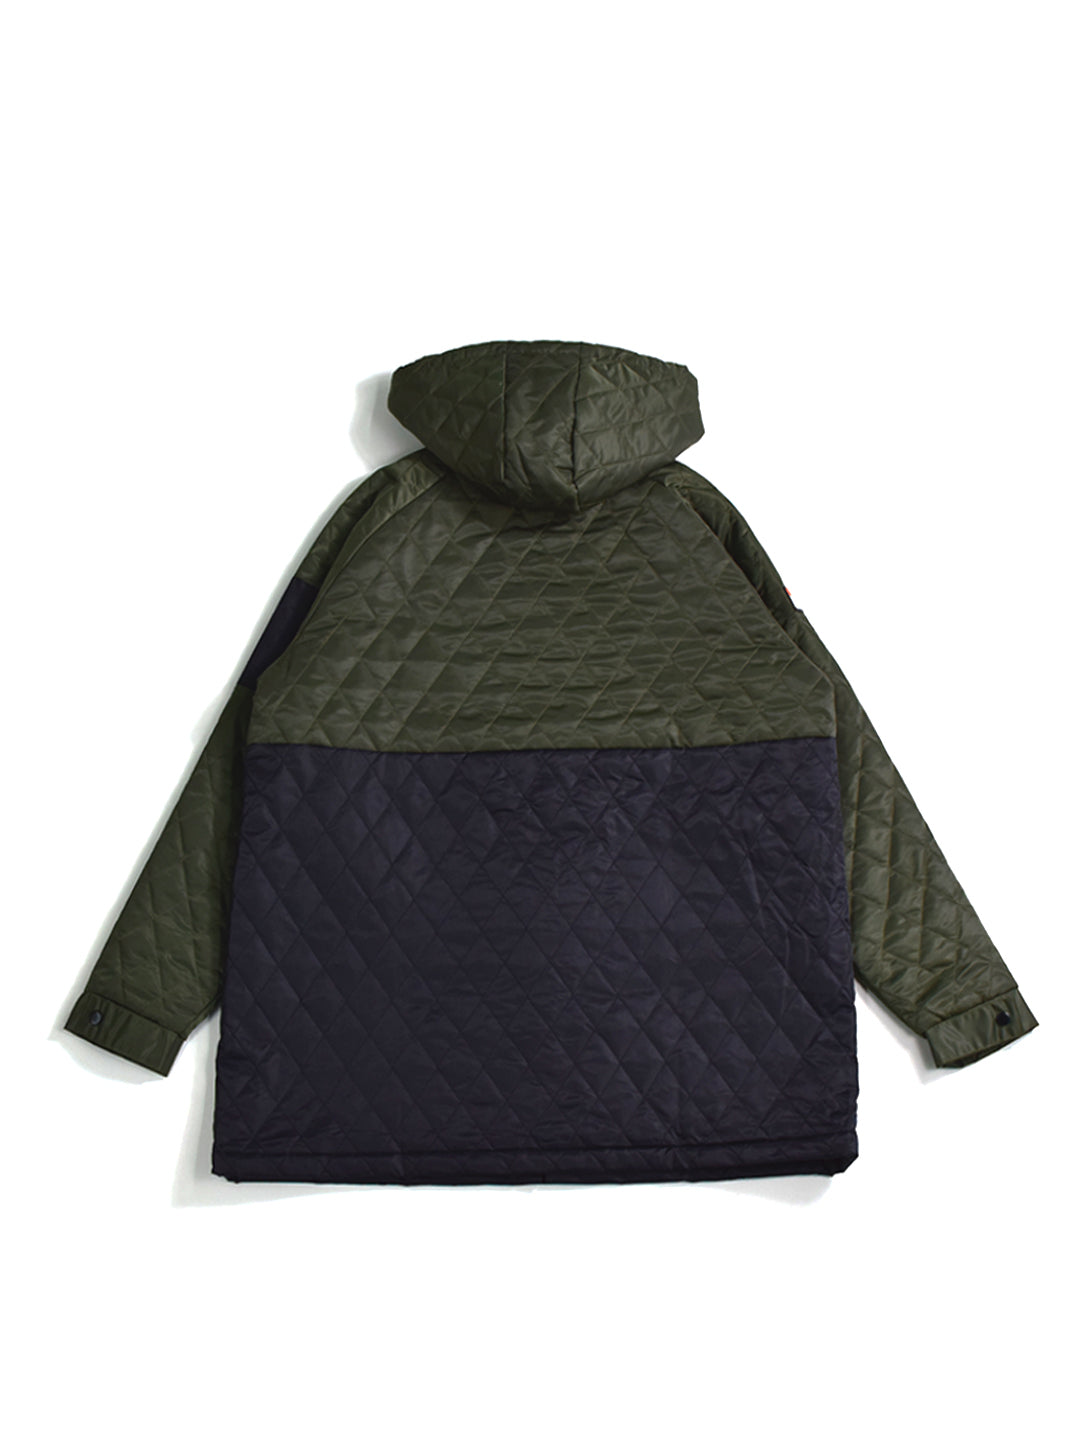 Quilted Parka- Olive Green